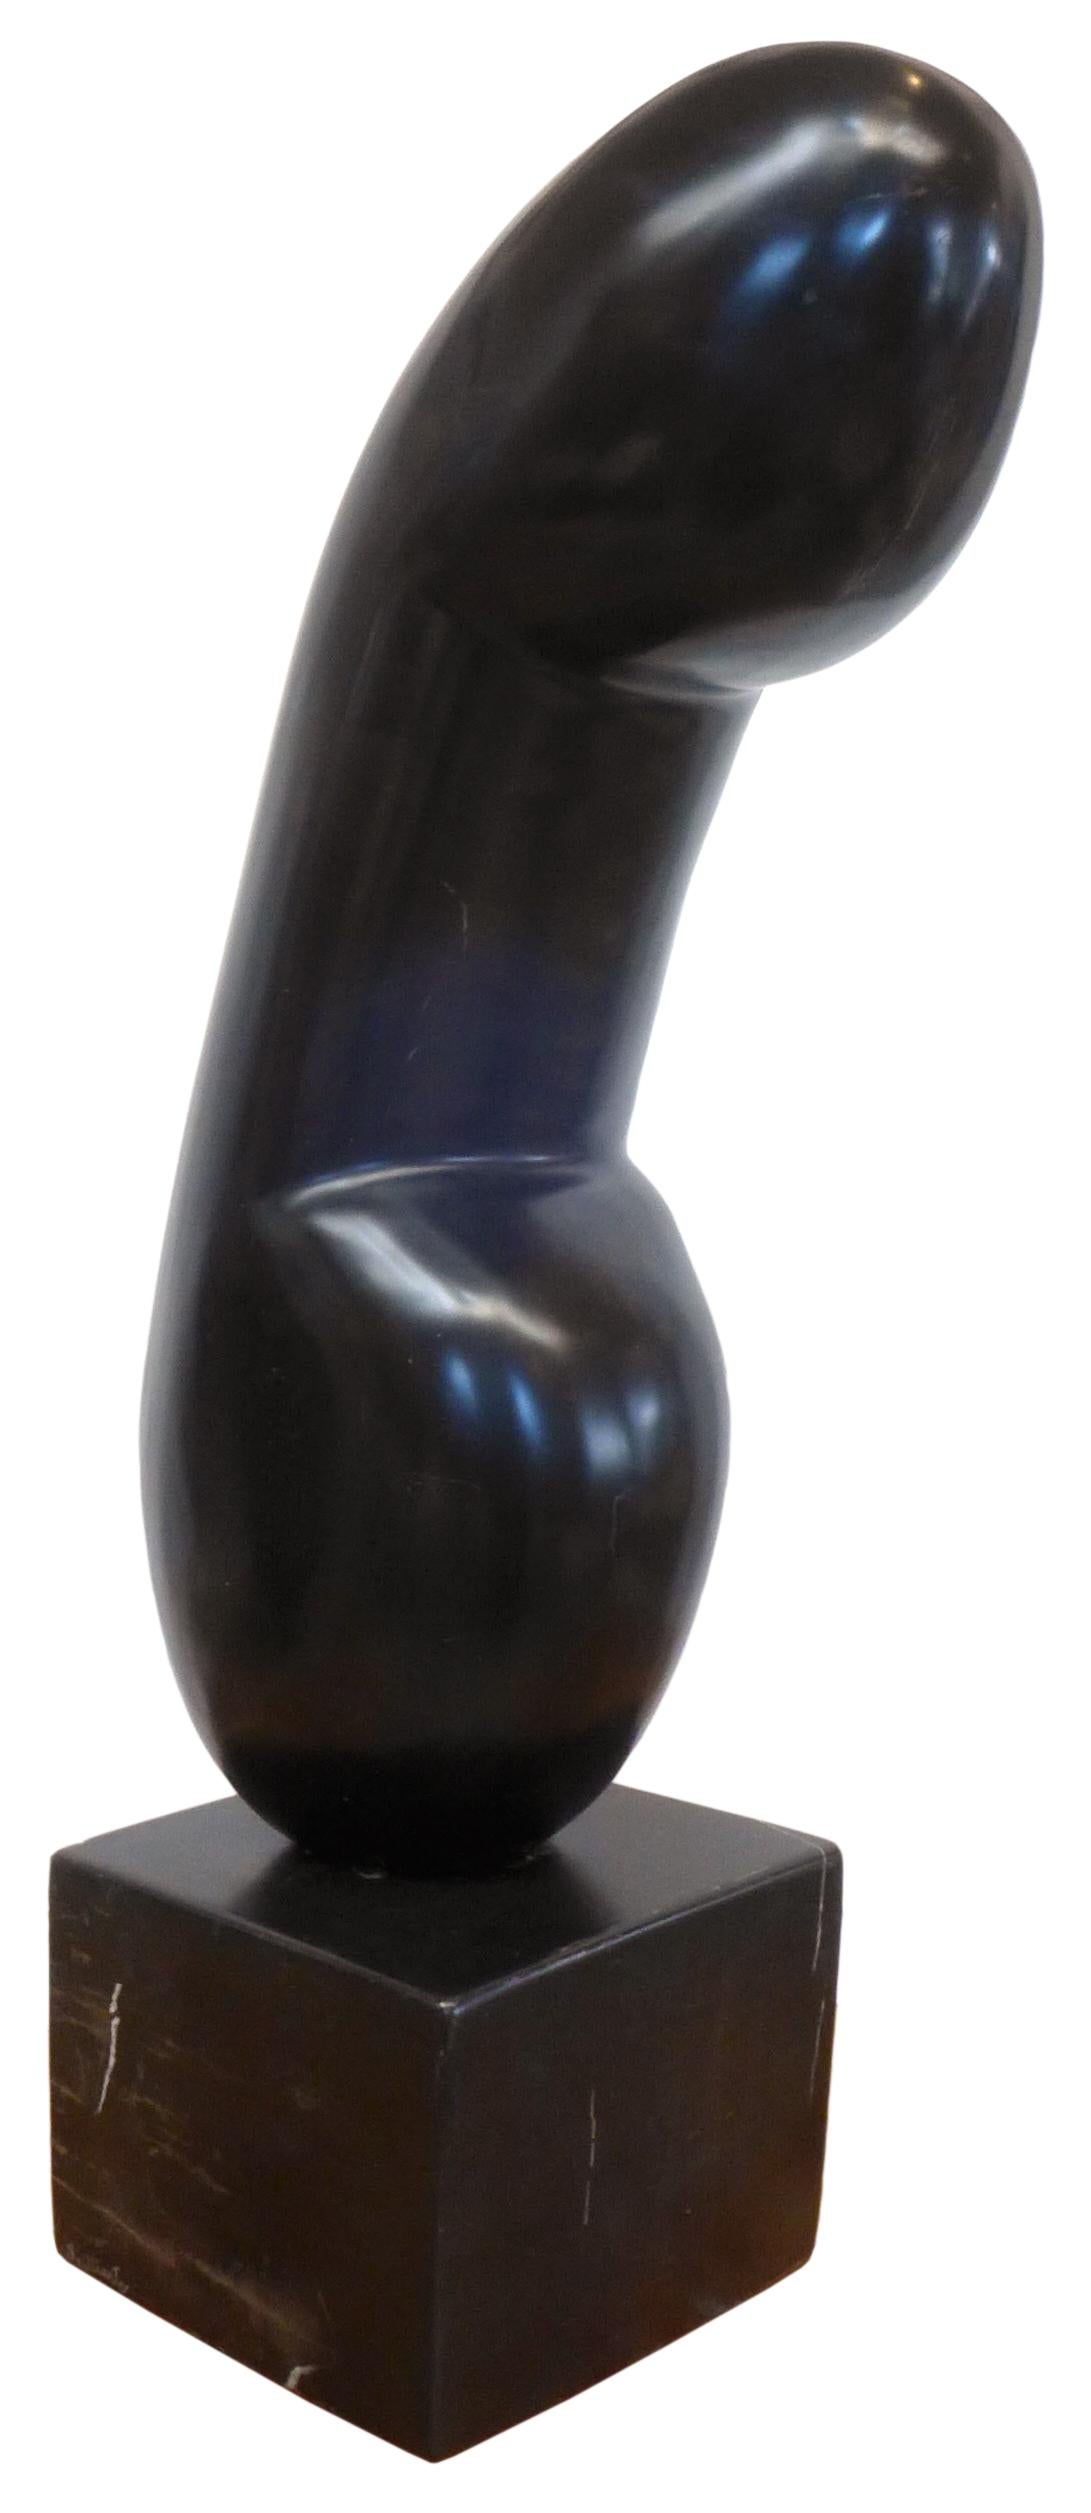 A fantastic abstract carved black marble sculpture in the manner of Constantin Brancusi. An utterance of clear phallic intent, an alluring and beautifully sculpted form of powerful scale and presence. Very subtle white veining throughout. Mounted on